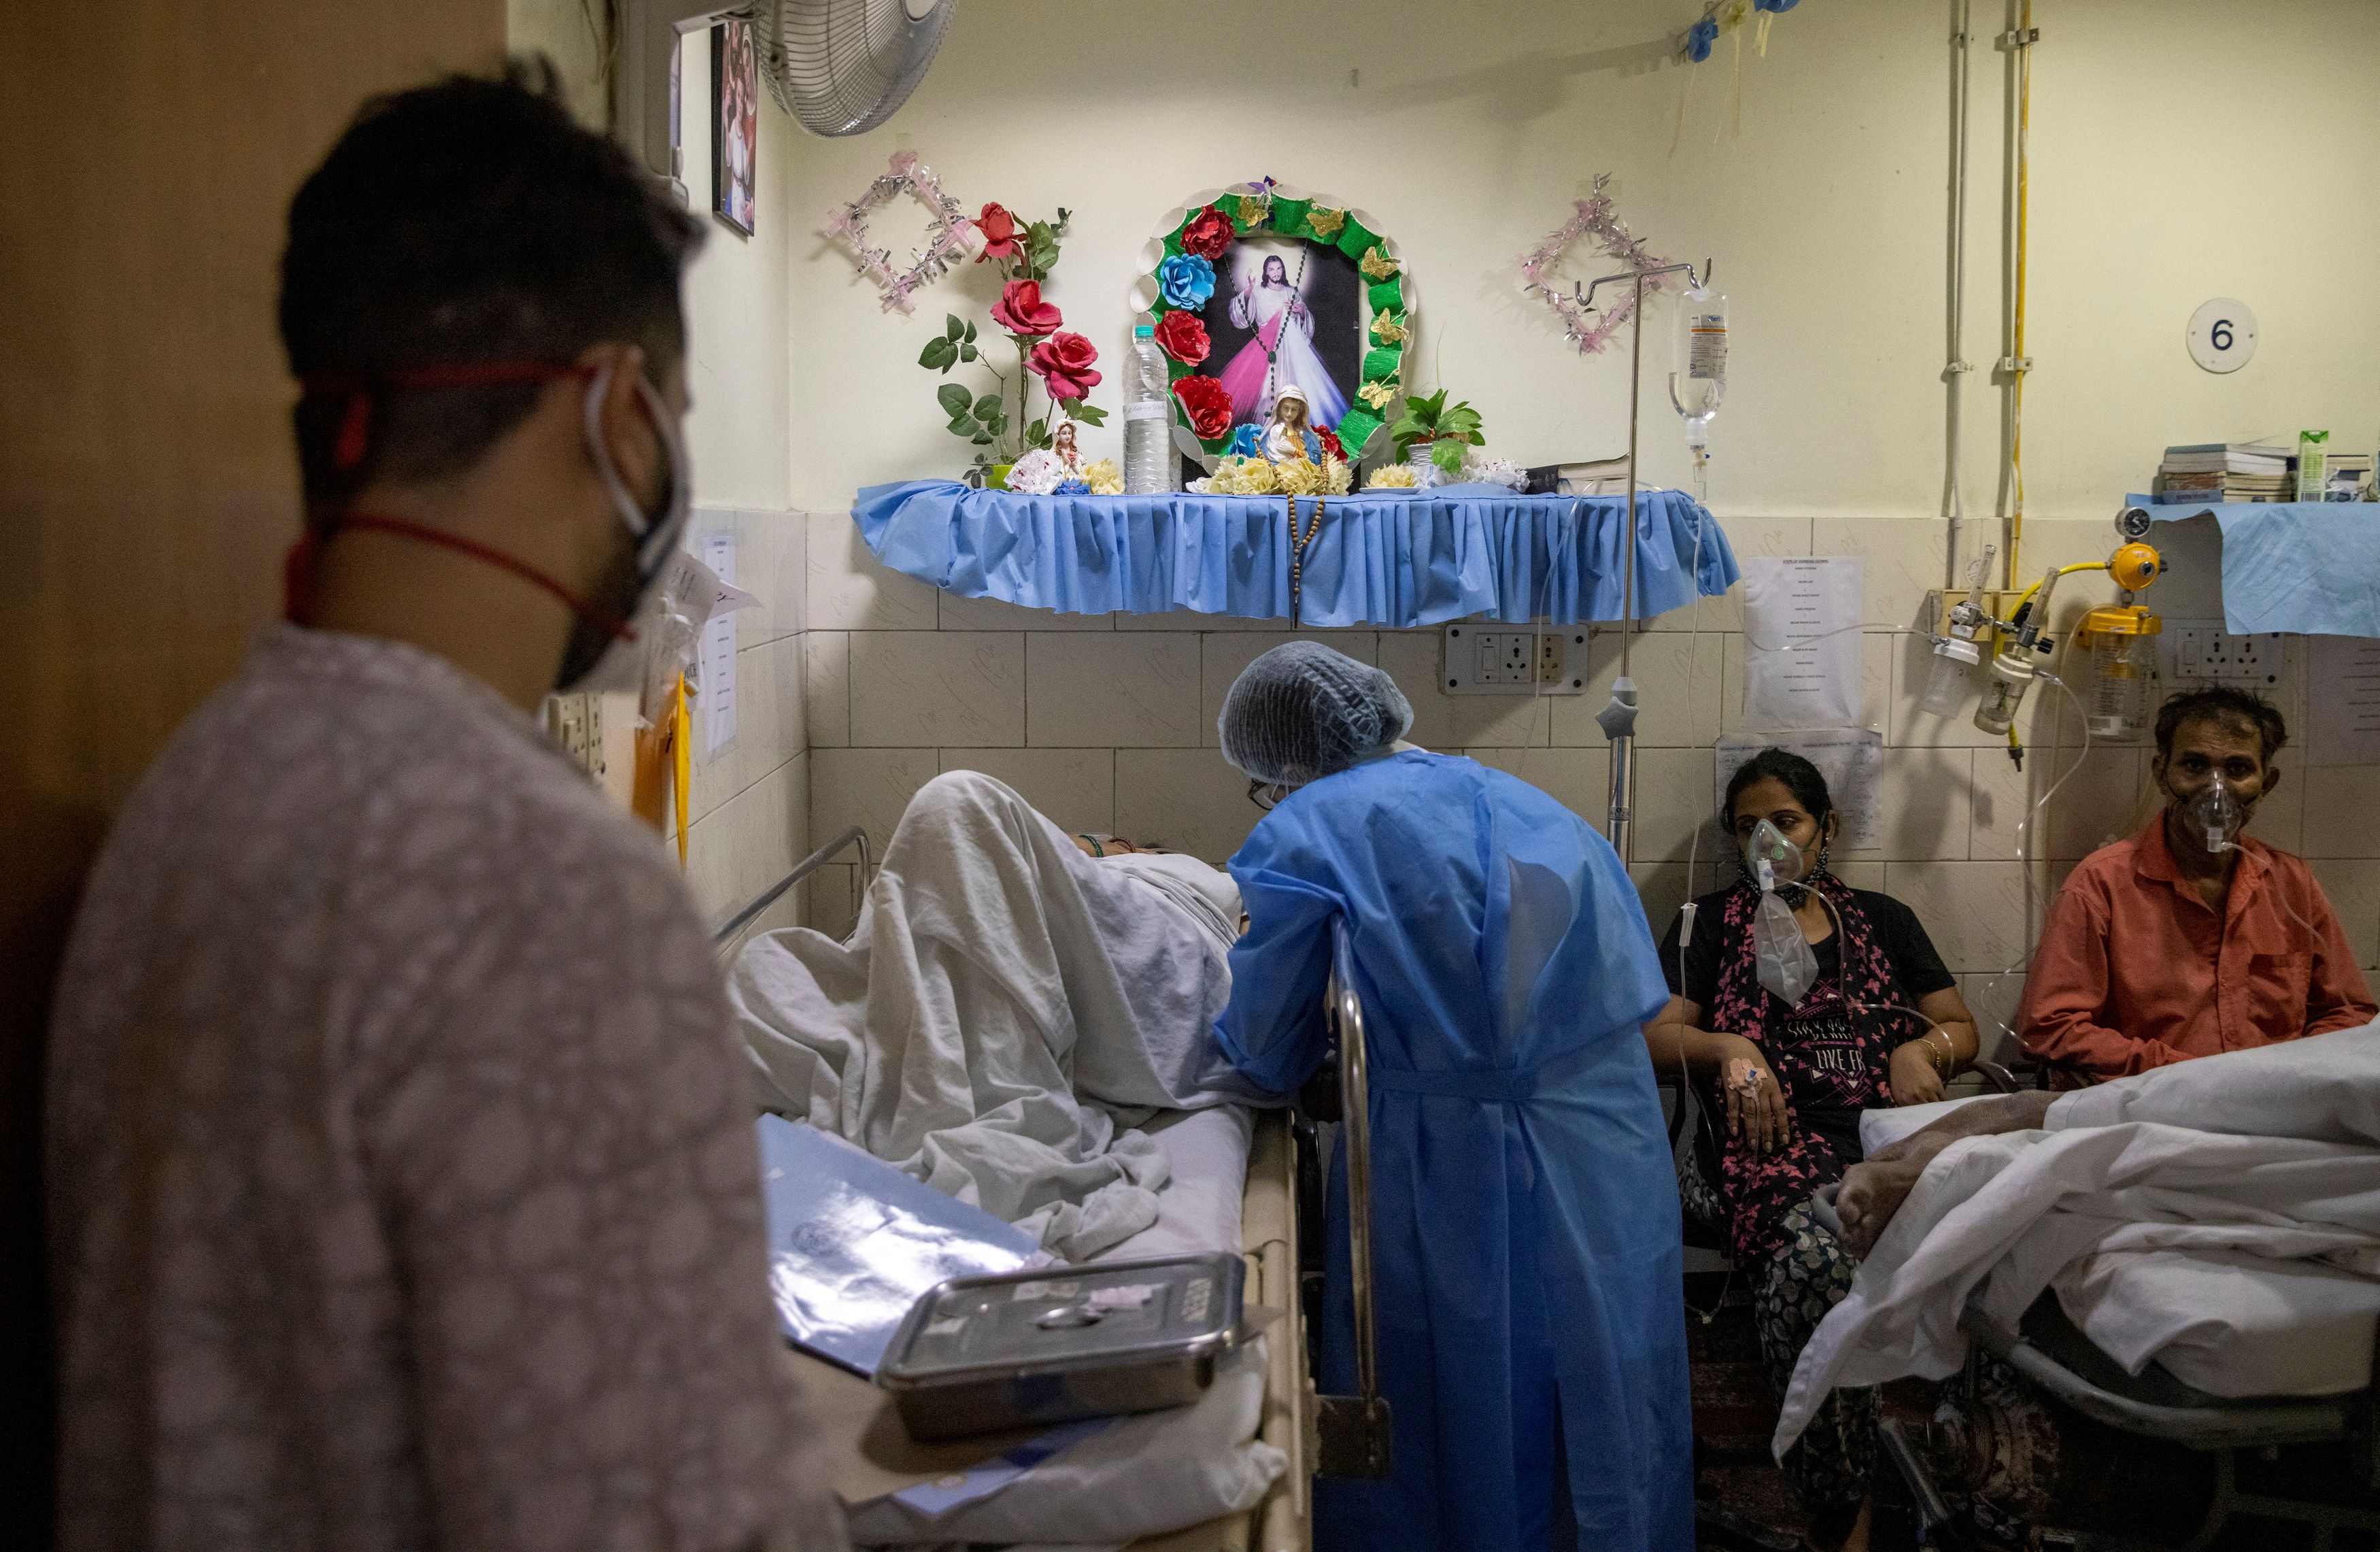 People suffering from the coronavirus disease (COVID-19) are treated inside an overcrowded casualty ward at a hospital in New Delhi